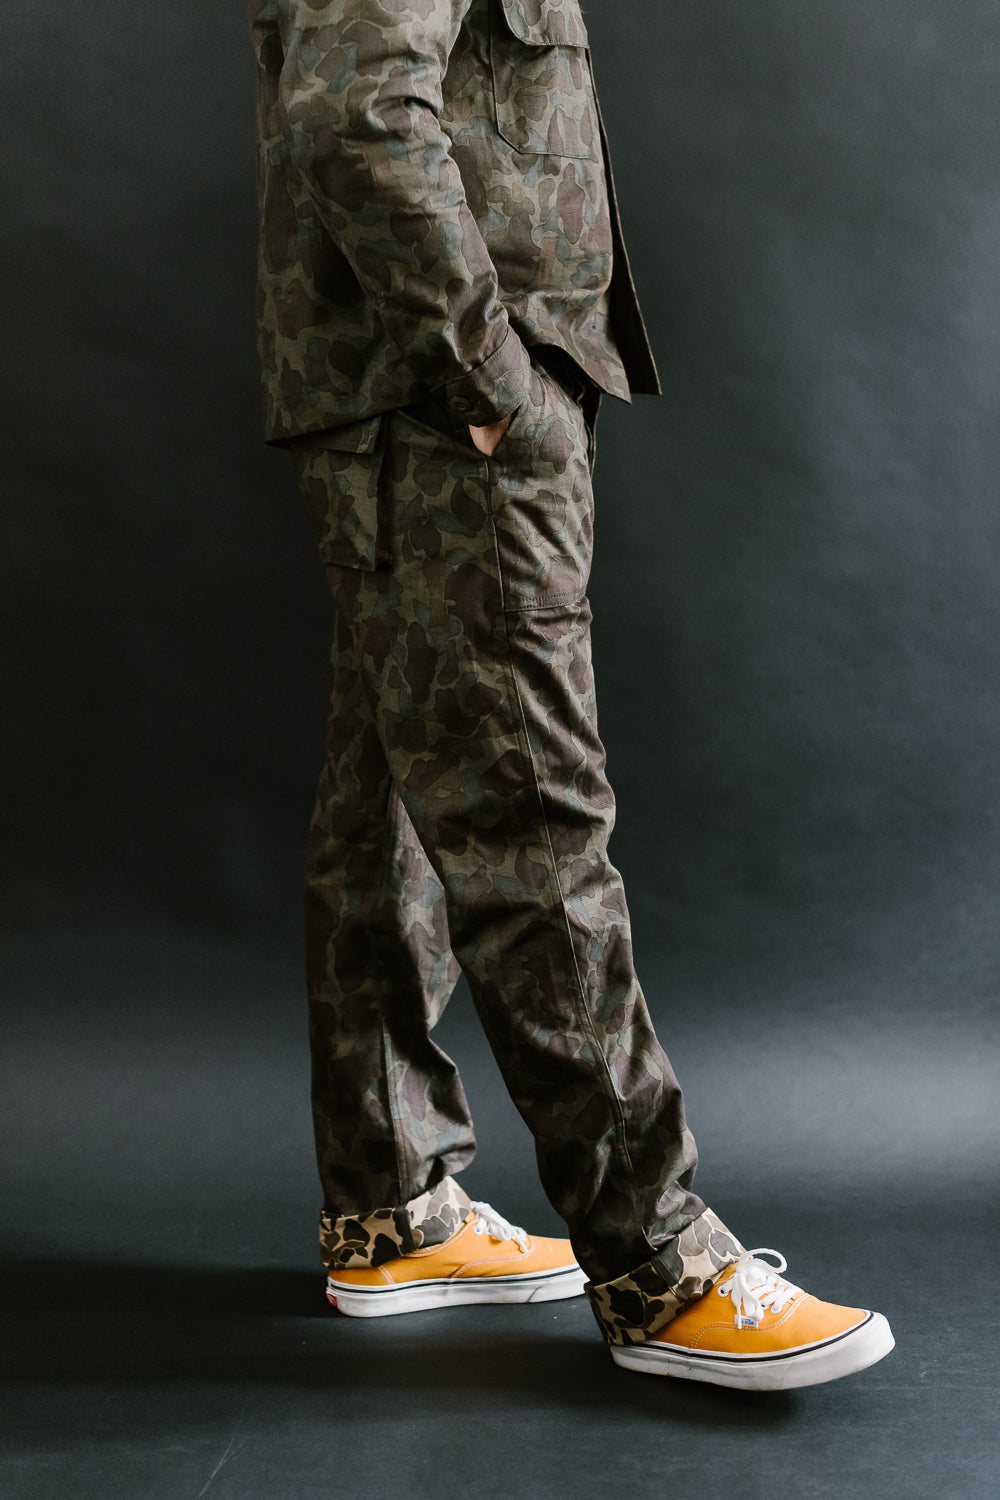 Camo Pants All Sizes 80s 90s Cargo Pants Camouflage Combat Grunge Skater  Punk Woodland BDU Utility Military Issue Army Mens or Womens - Etsy